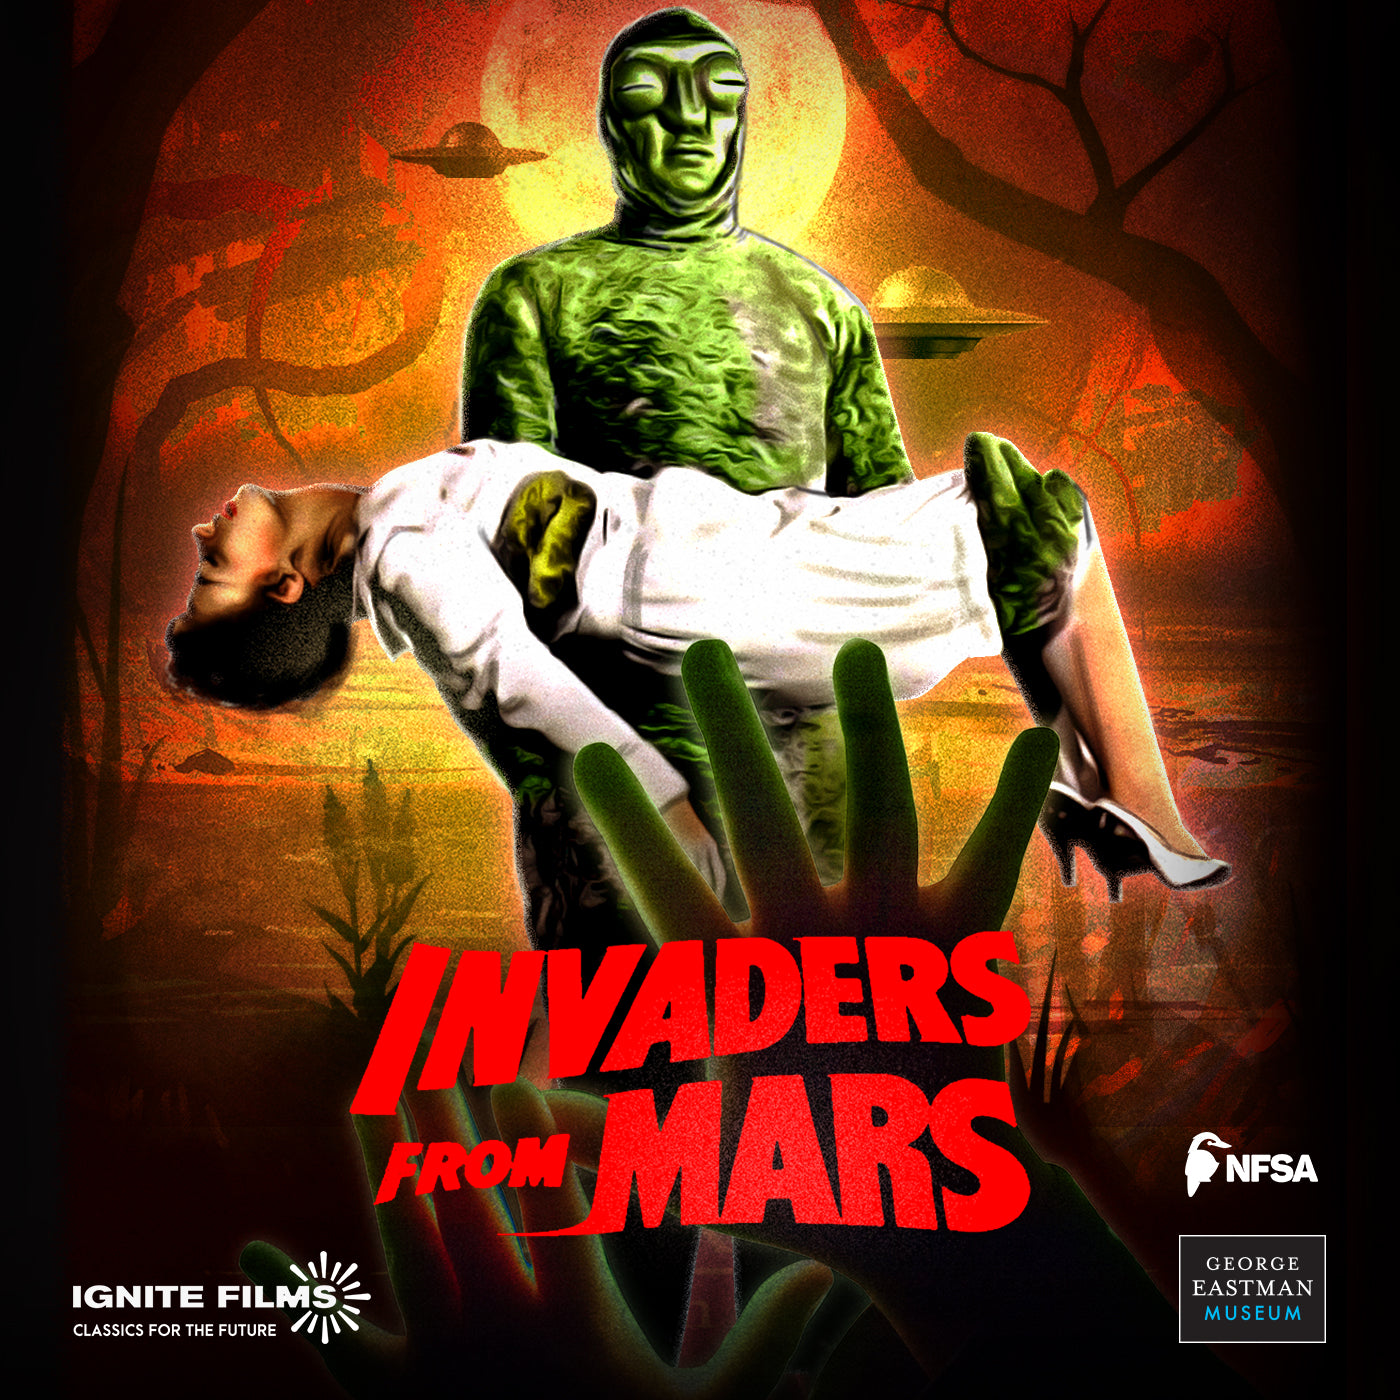 Invaders From Mars Ignite Films 4K UHD [NEW]